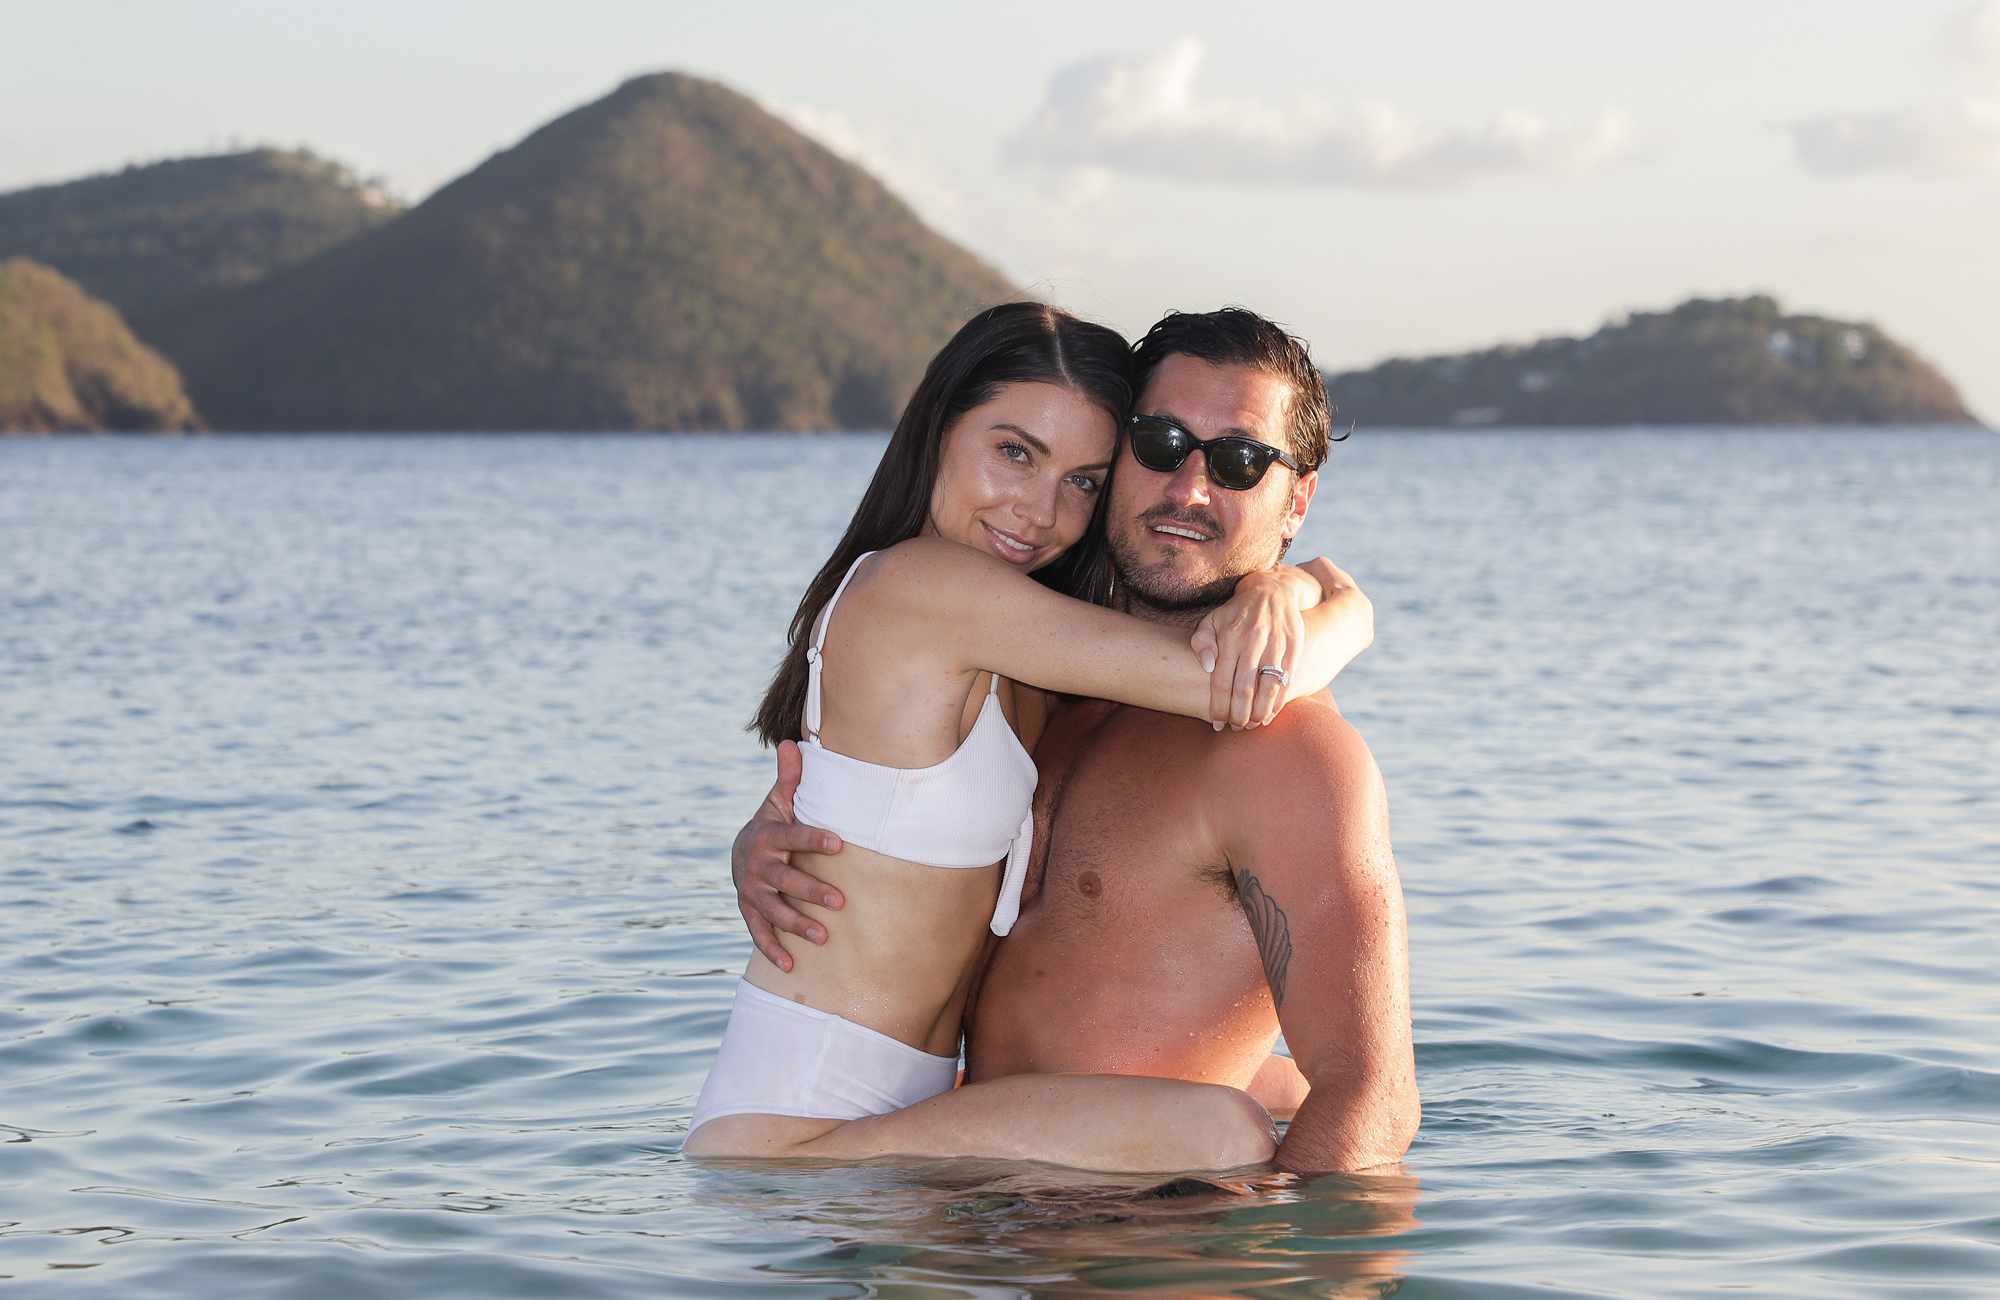 Dancing with The Stars champions and newlyweds Val Chmerkovskiy and Jenna Johnson spend their honeymoon at the luxurious Sandals Grande St. Lucian resort on April 23, 2019 in St Lucia, Saint Lucia.